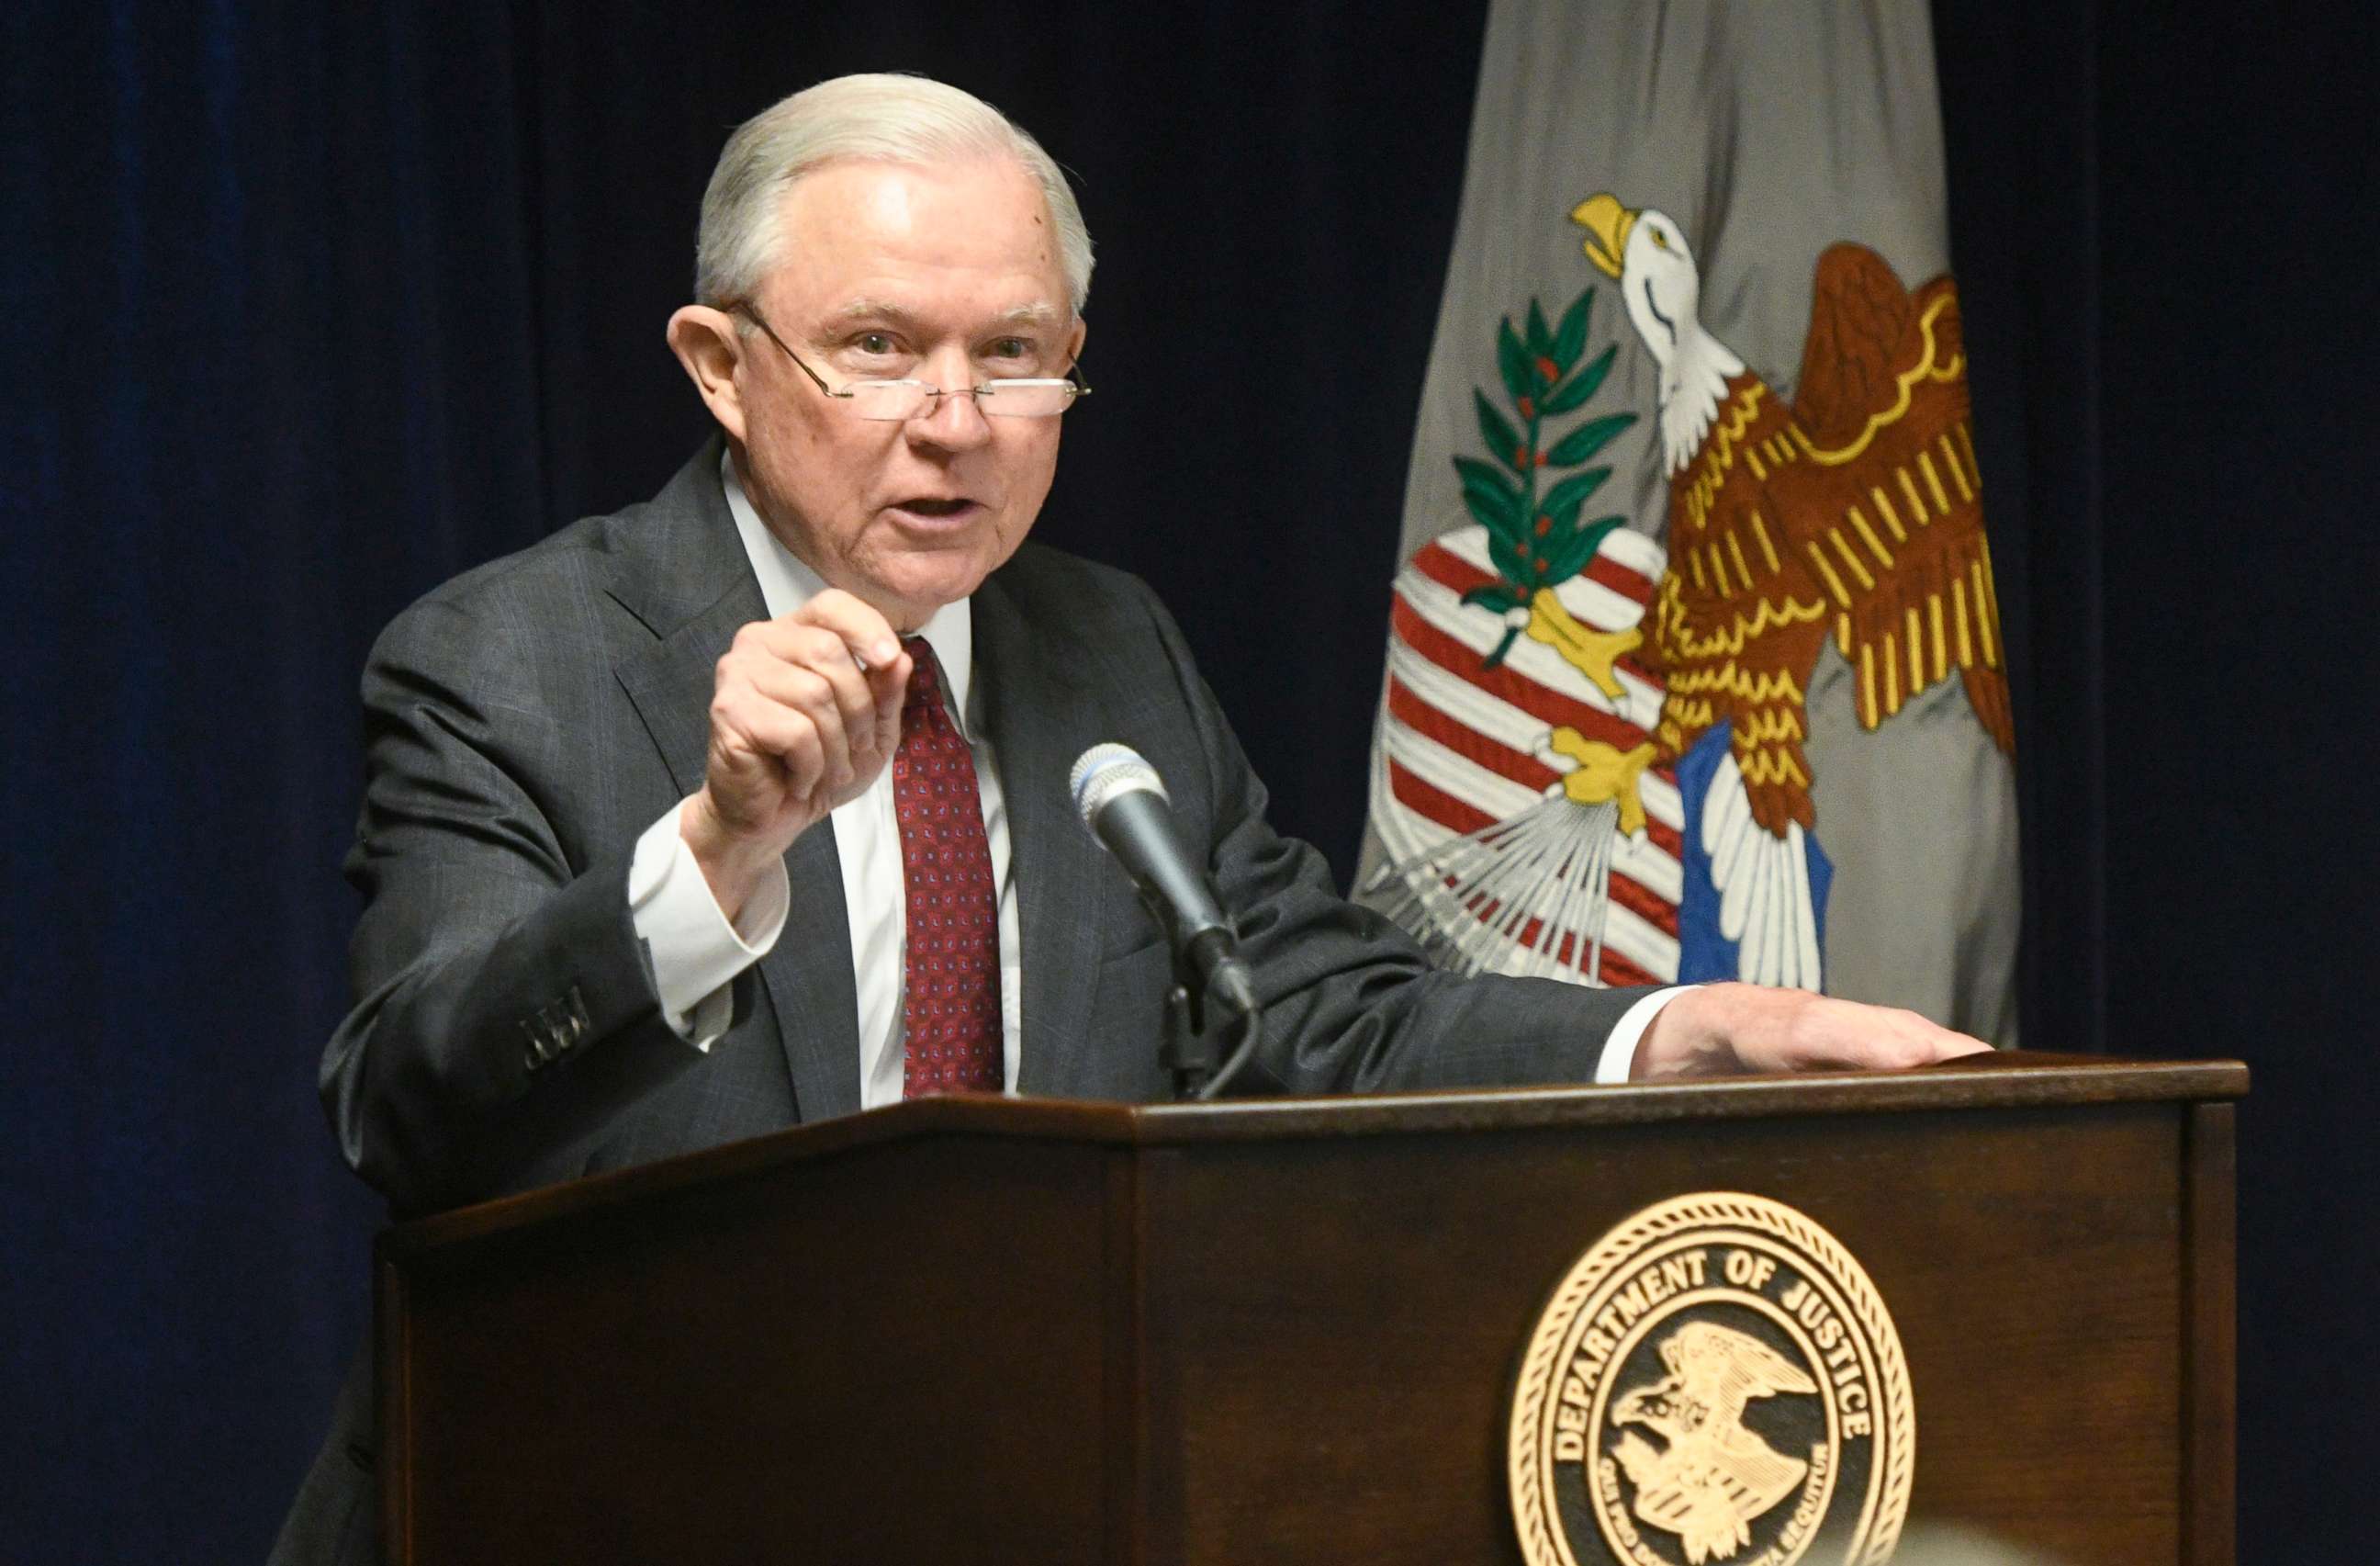 PHOTO: Attorney General Jeff Sessions delivers remarks on efforts to combat violent crime in America during an appearance at the United States Attorney's Office for the Middle District of Georgia, Aug. 9, 2018, in Macon, Ga.